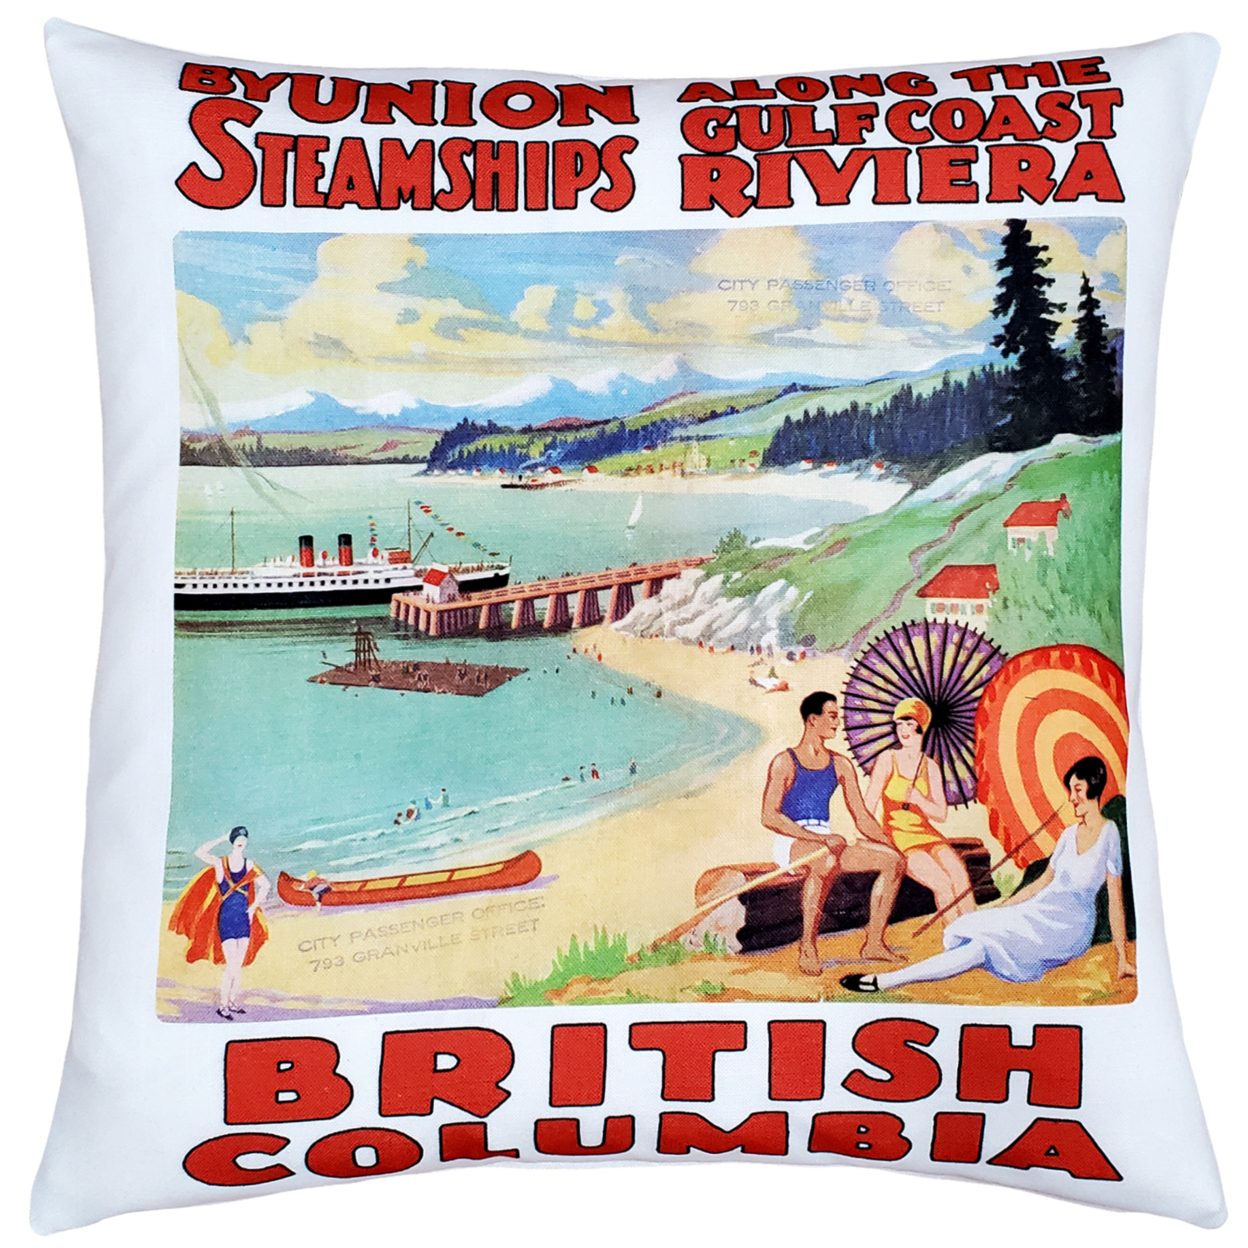 Gulf Coast By Union Steamship Throw Pillow 20x20, With Polyfill Insert